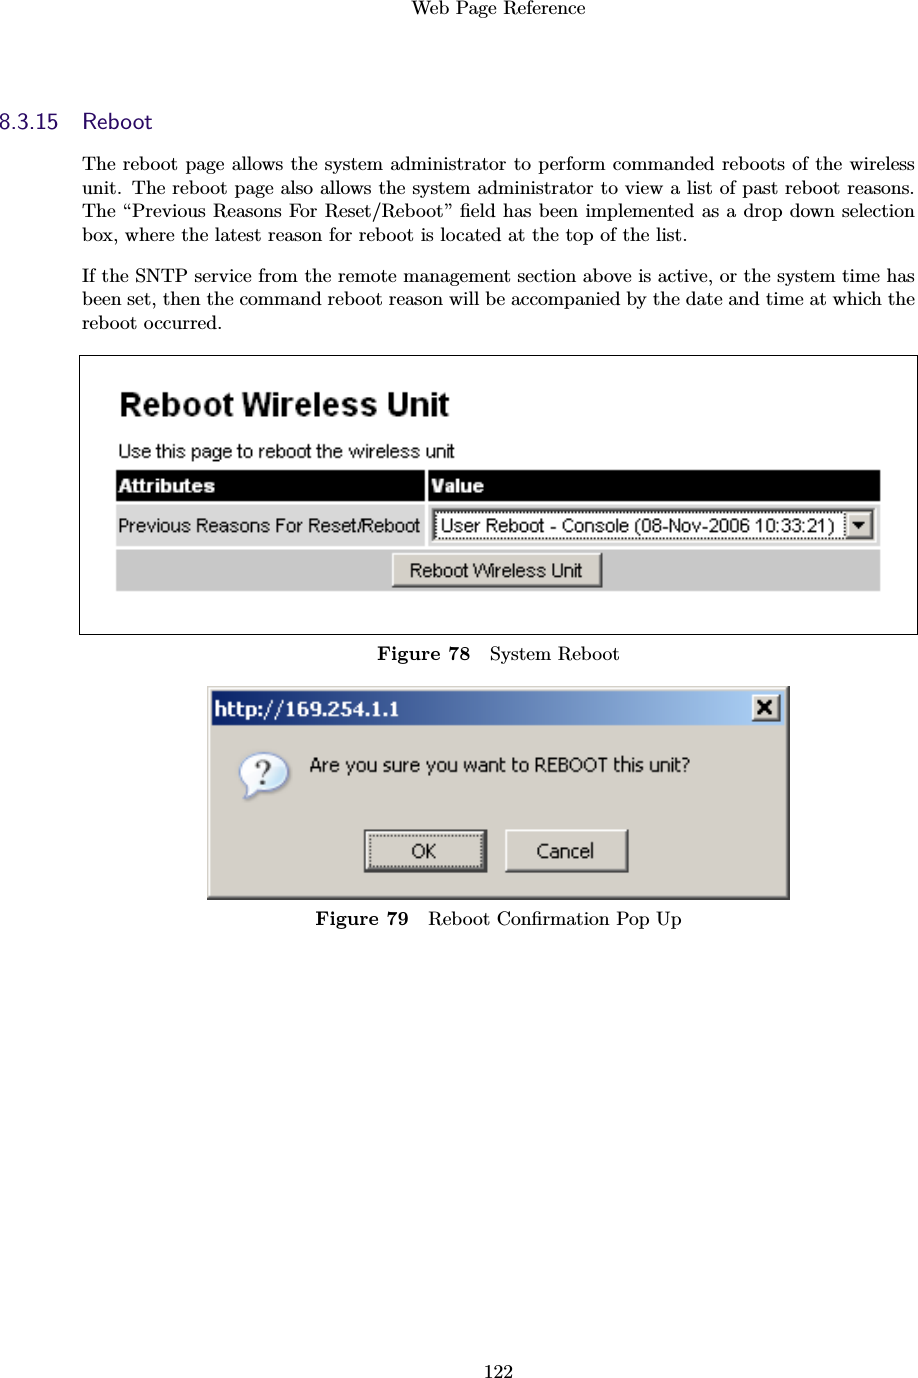 Web Page Reference1228.3.15 RebootThe reboot page allows the system administrator to perform commanded reboots of the wirelessunit. The reboot page also allows the system administrator to view a list of past reboot reasons.The “Previous Reasons For Reset/Reboot” ﬁeld has been implemented as a drop down selectionbox, where the latest reason for reboot is located at the top of the list.If the SNTP service from the remote management section above is active, or the system time hasbeen set, then the command reboot reason will be accompanied by the date and time at which thereboot occurred.Figure 78 System RebootFigure 79 Reboot Conﬁrmation Pop Up